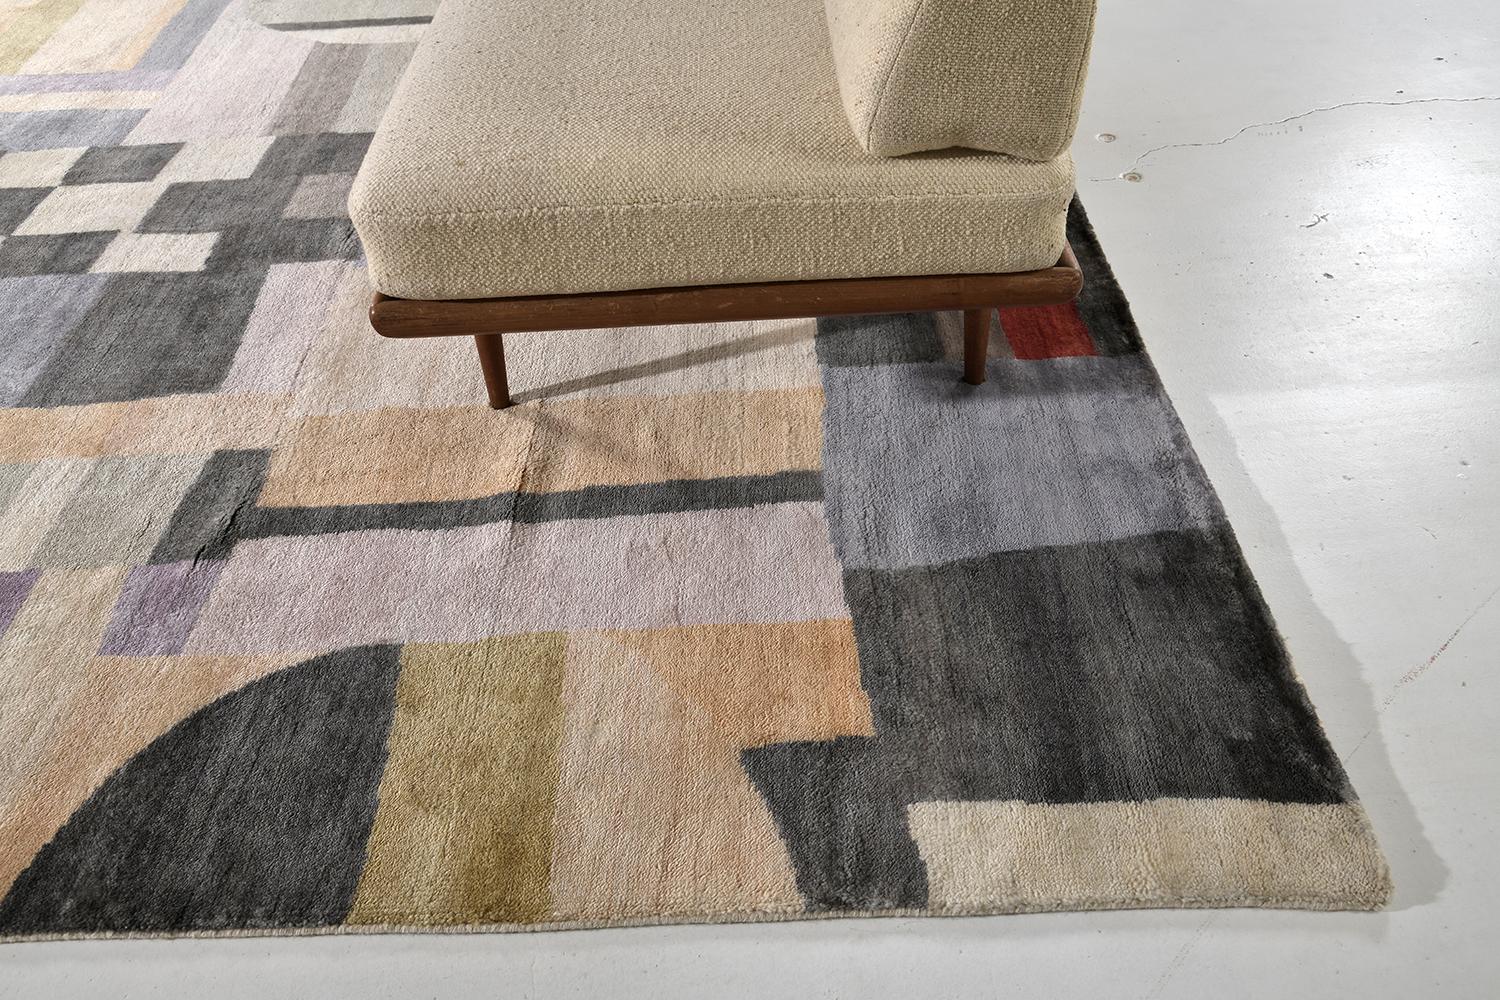 'Etude' is a handwoven pure wool piece designed by leading textile designer Liesel Plambeck. It was inspired by the early 1920 European Bauhaus design movement with the incorporation of geometric shapes vivid primary colorations. '

Rug Number